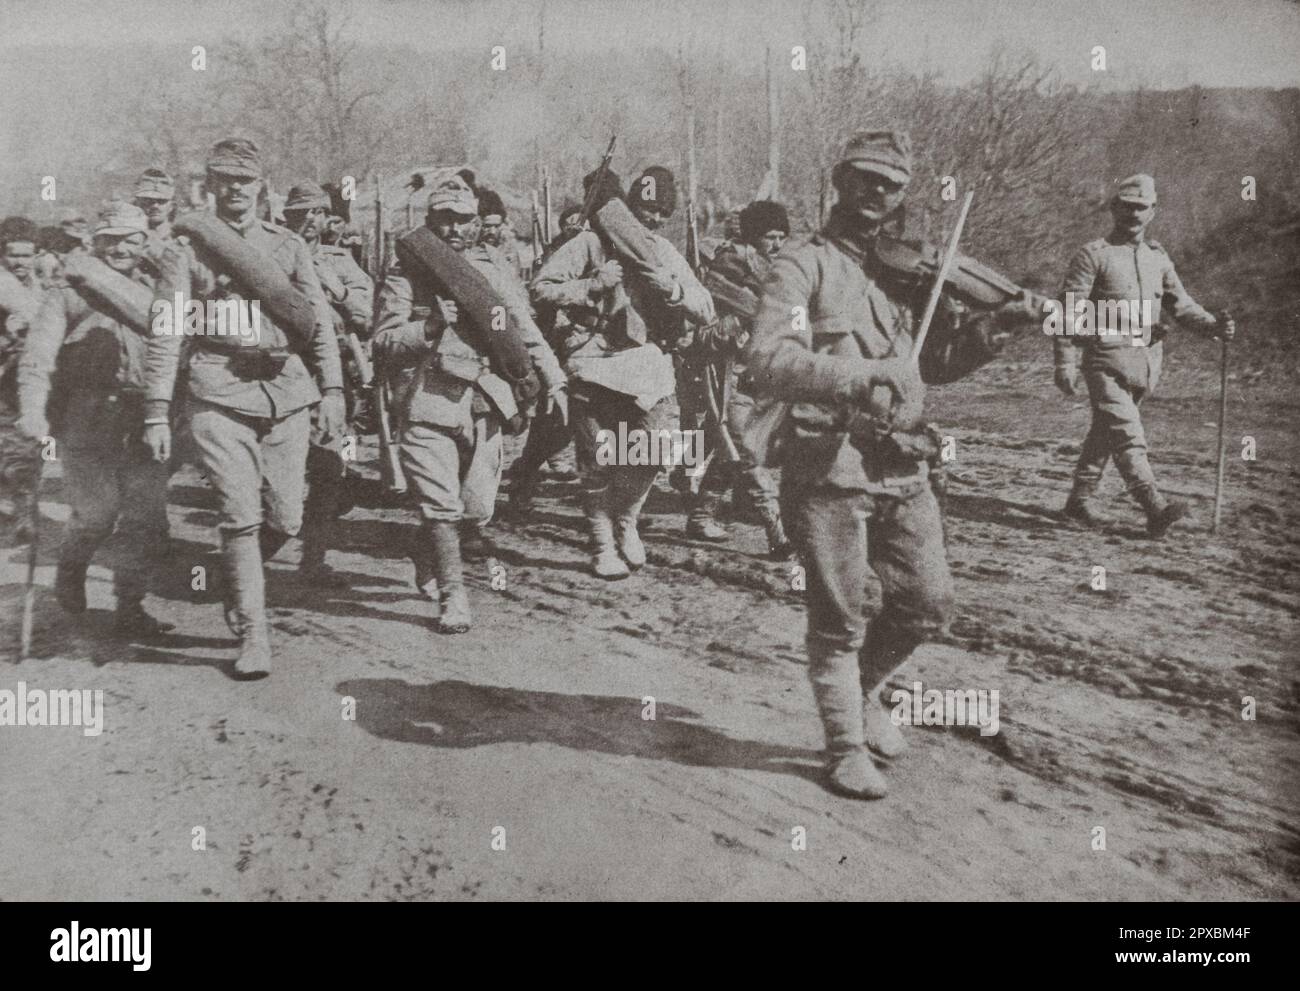 World War I. Our Romanian Allies. The Romanian army reorganized after its 1916 trials: a regiment going to the front to the sound of the violin. Stock Photo